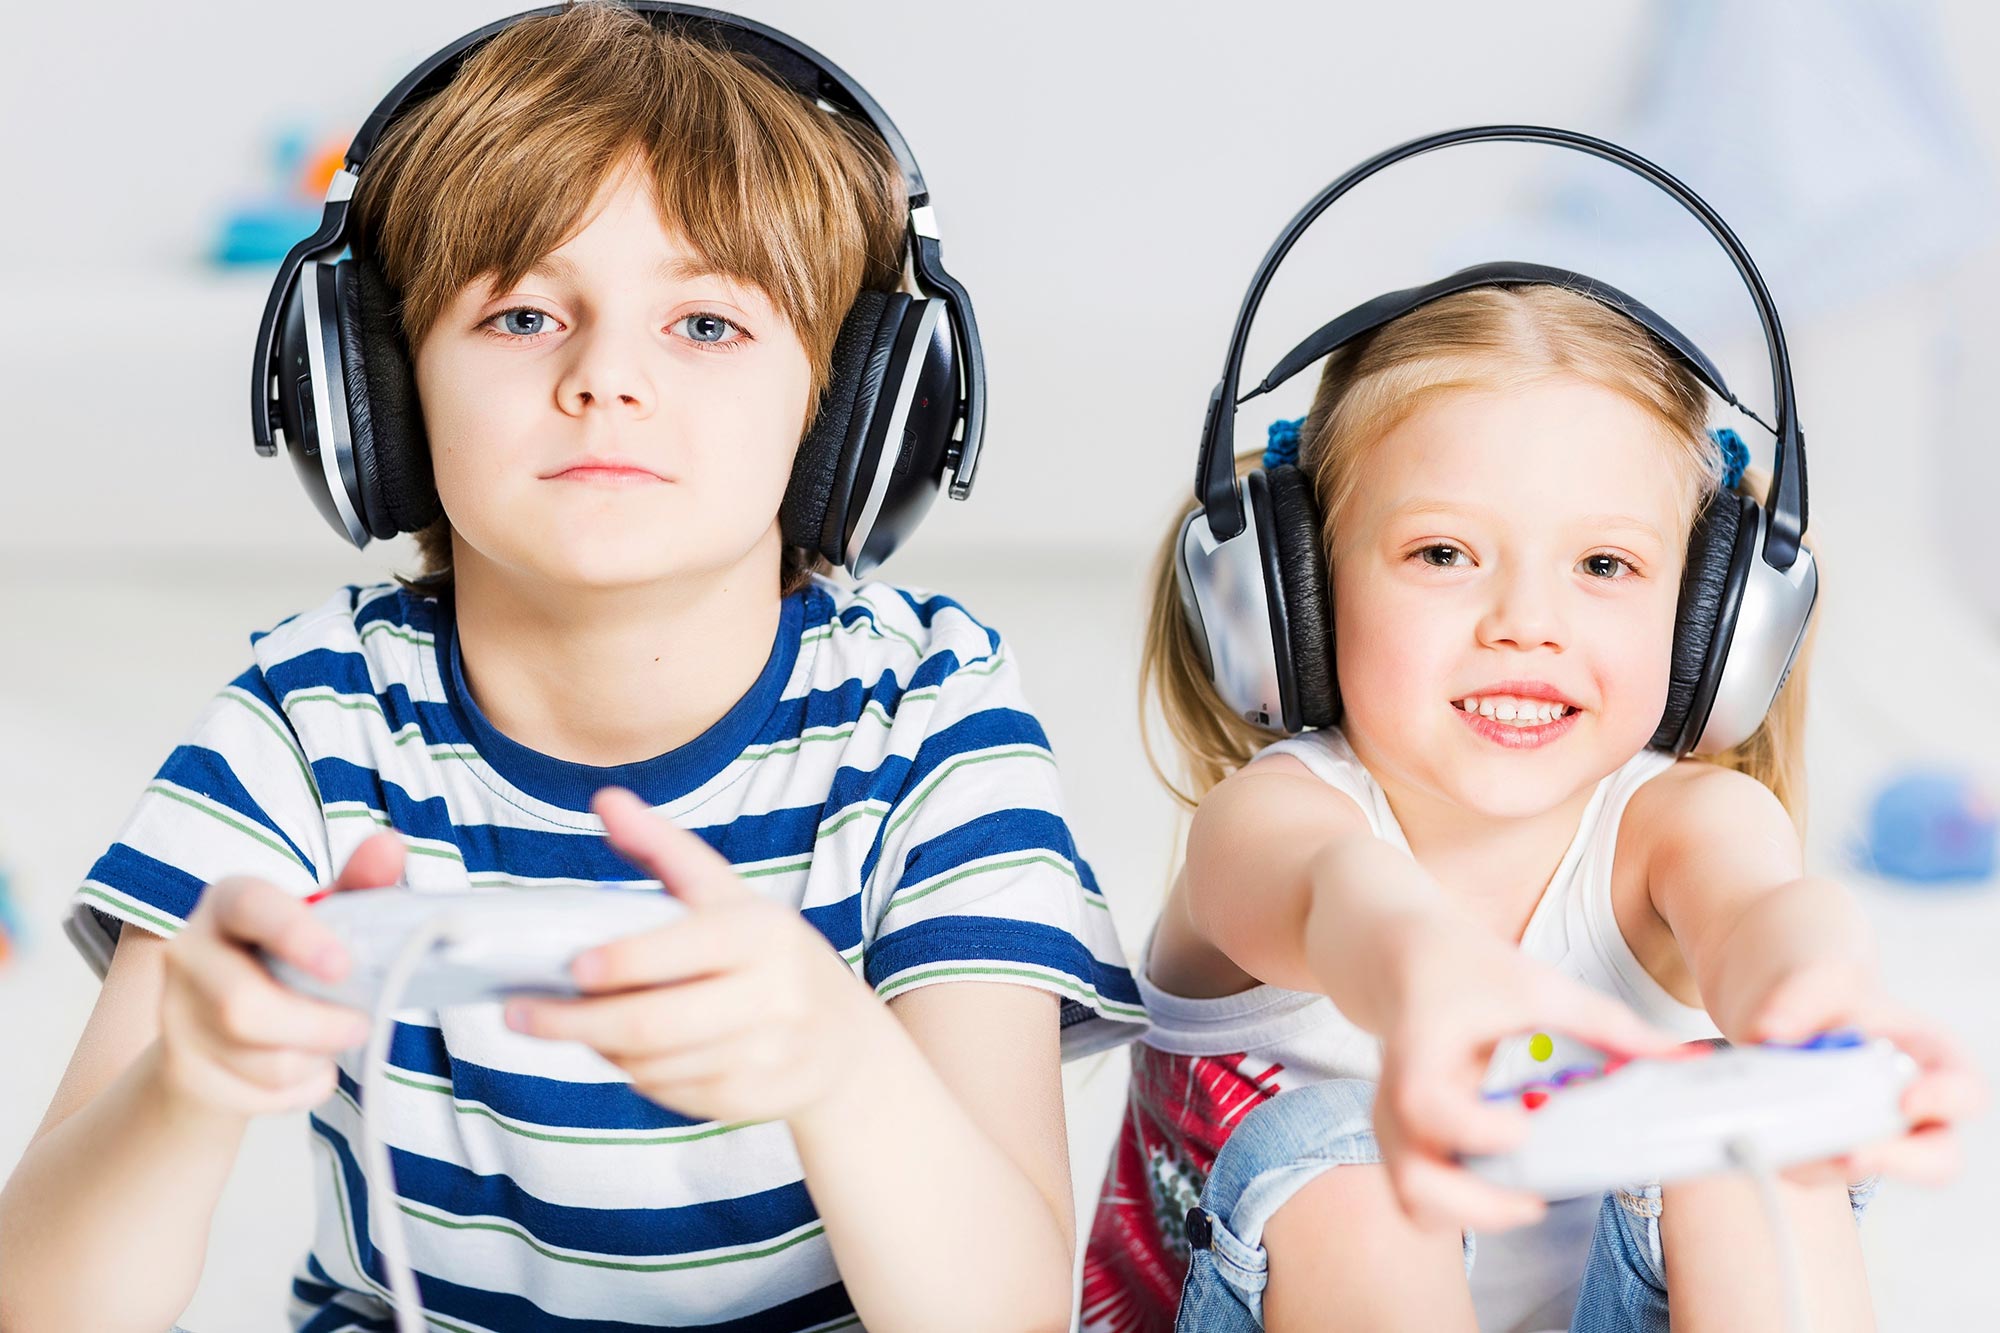 Research Shows Video Game Players Have Enhanced Brain Activity and